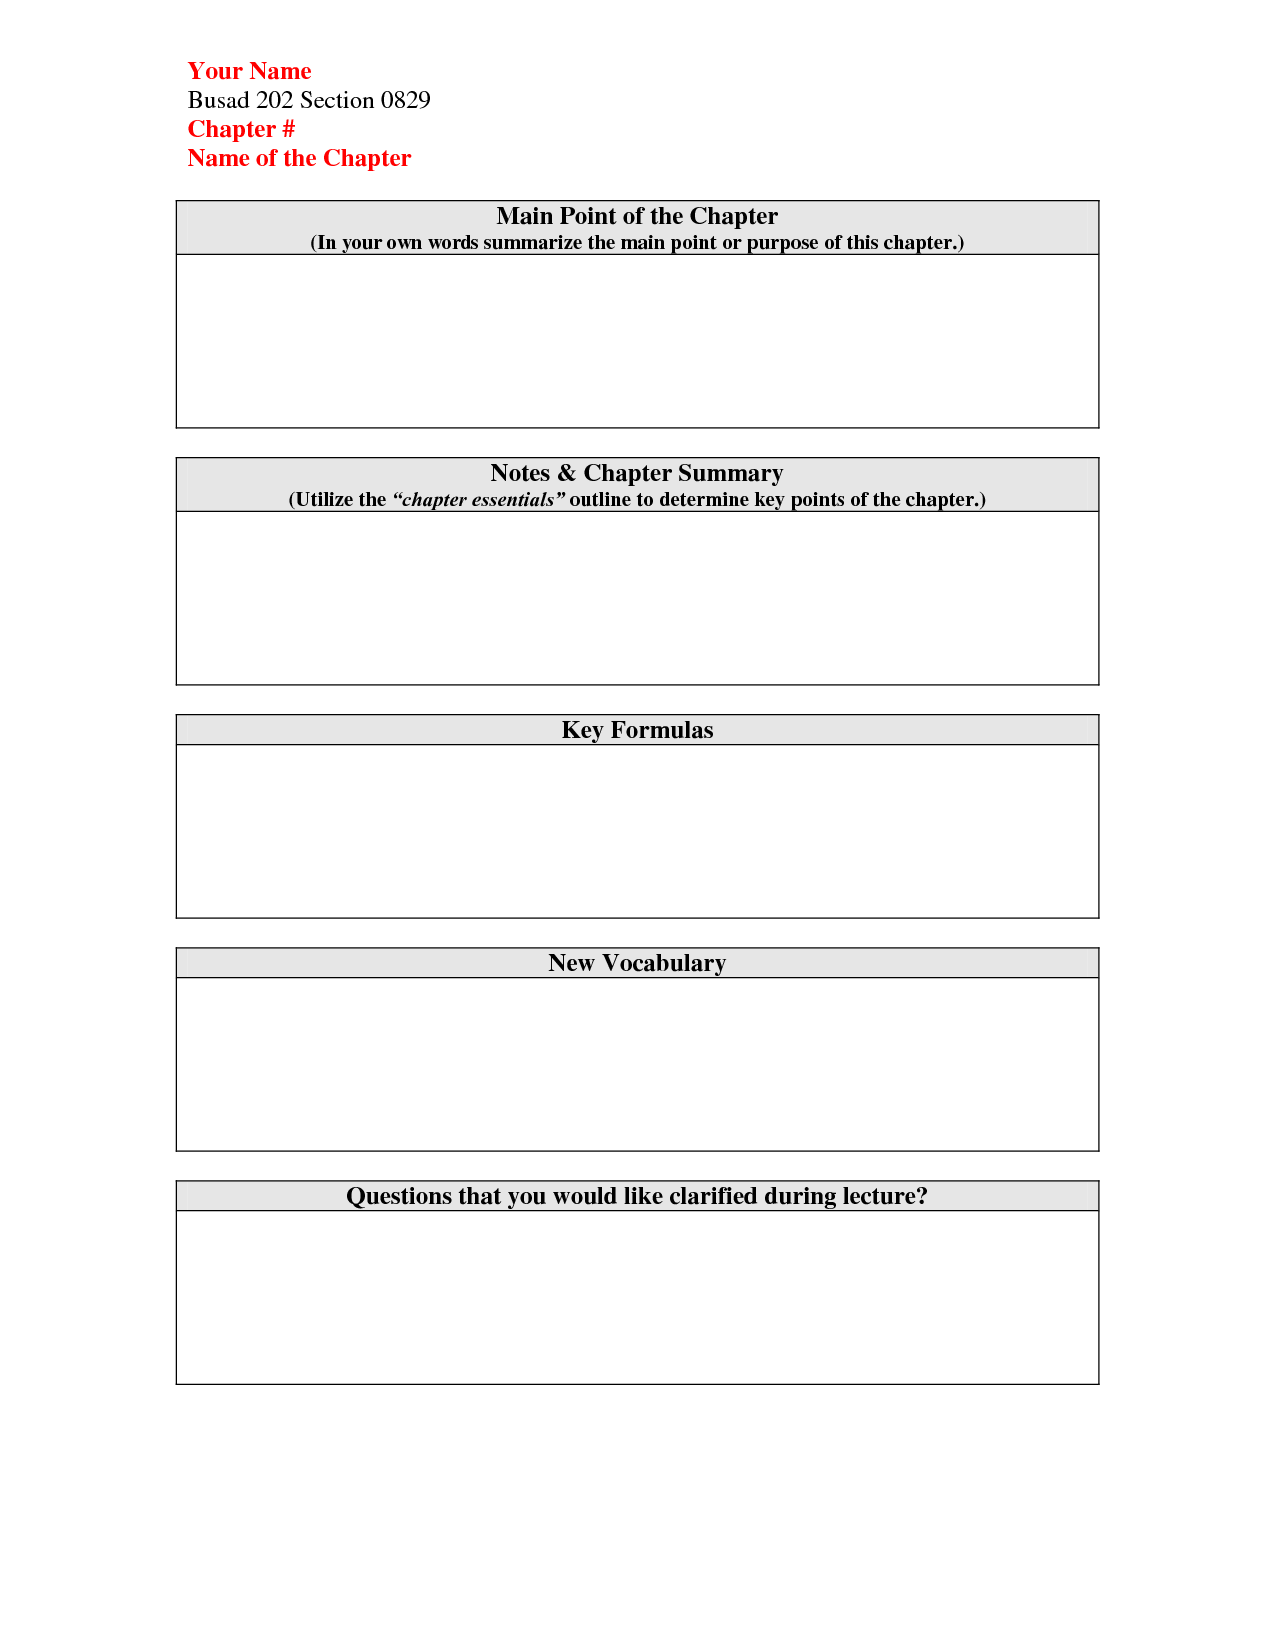 16 Best Images of Book Chapter Summary Worksheet Chapter Summary